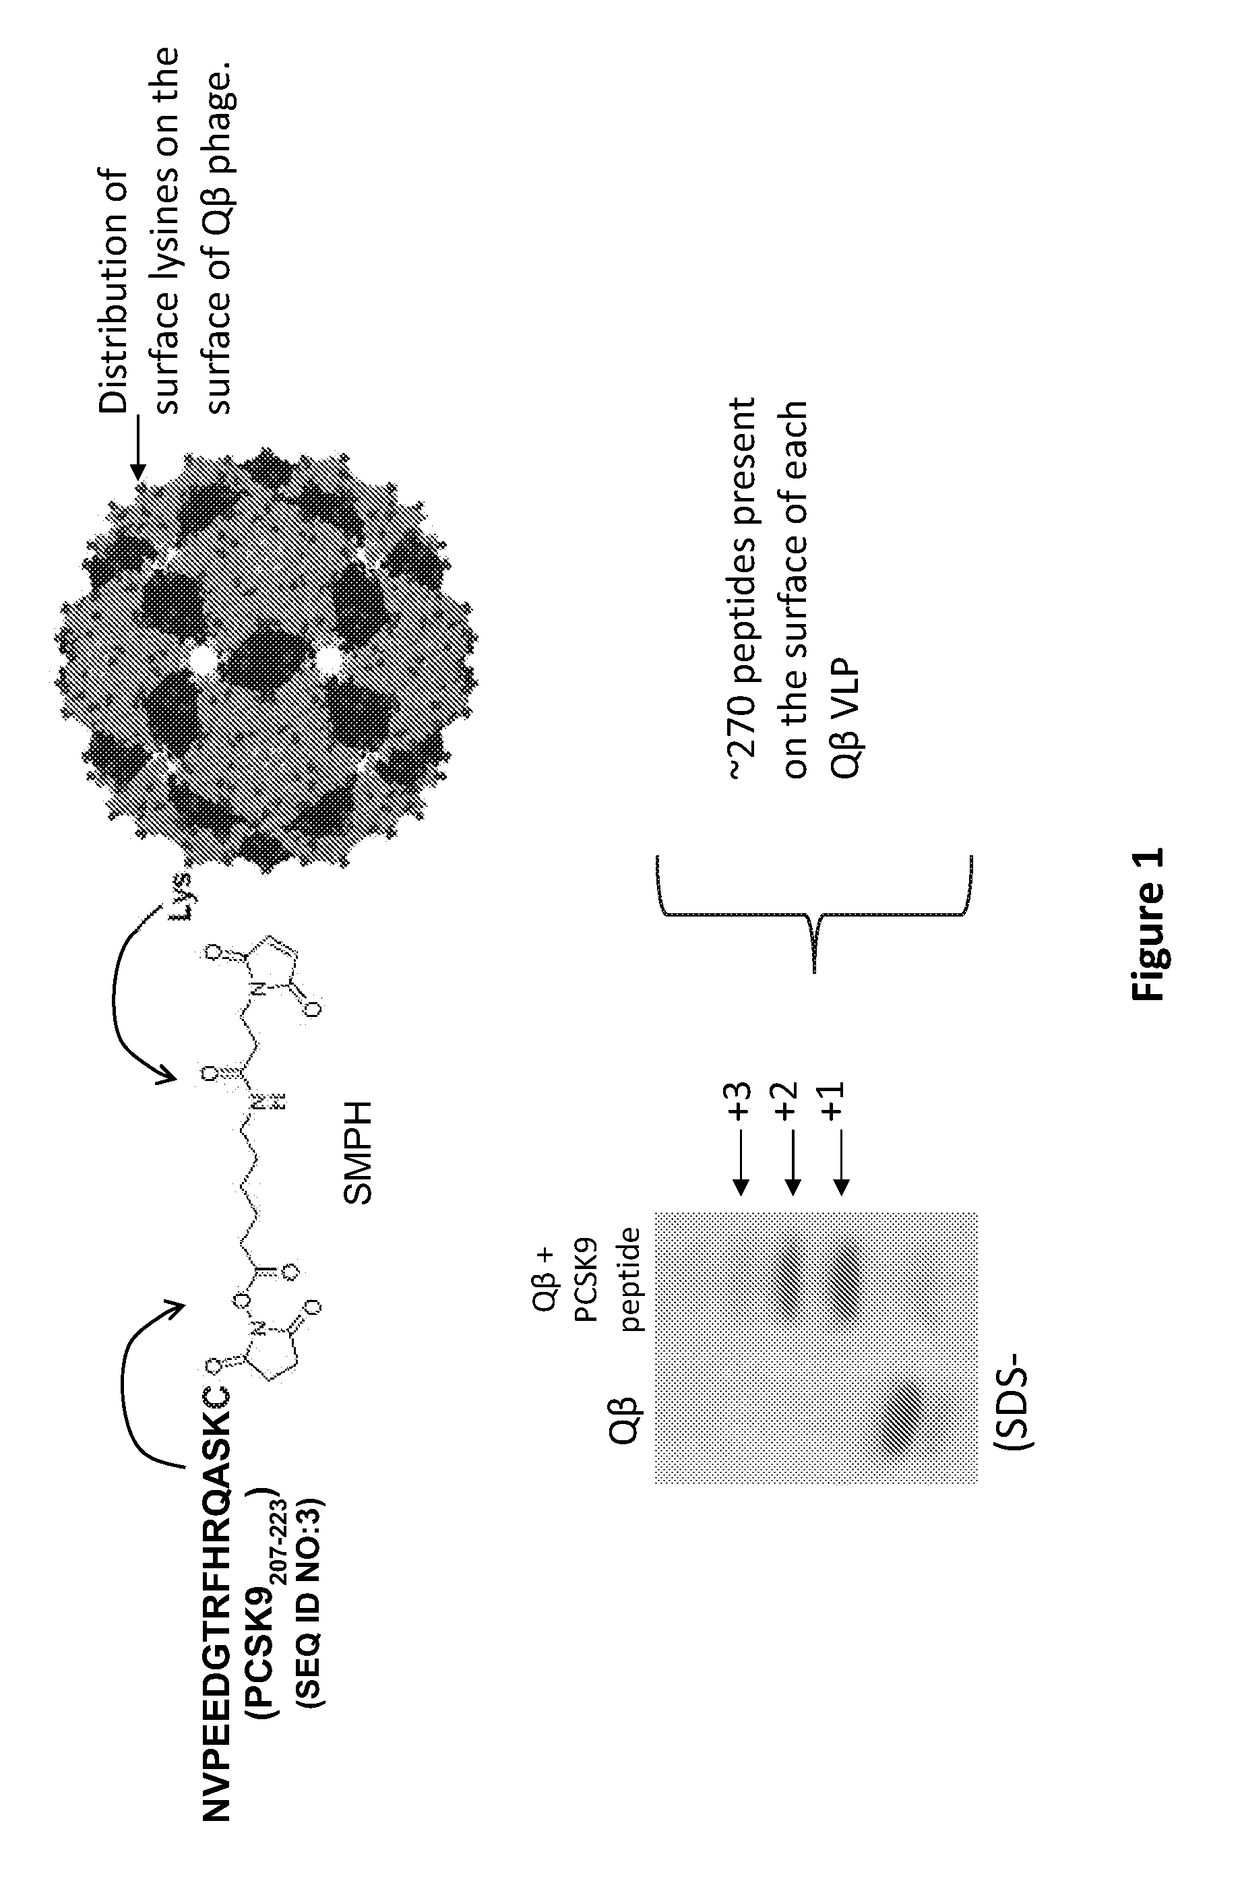 Pcsk9 vaccine and methods of using the same